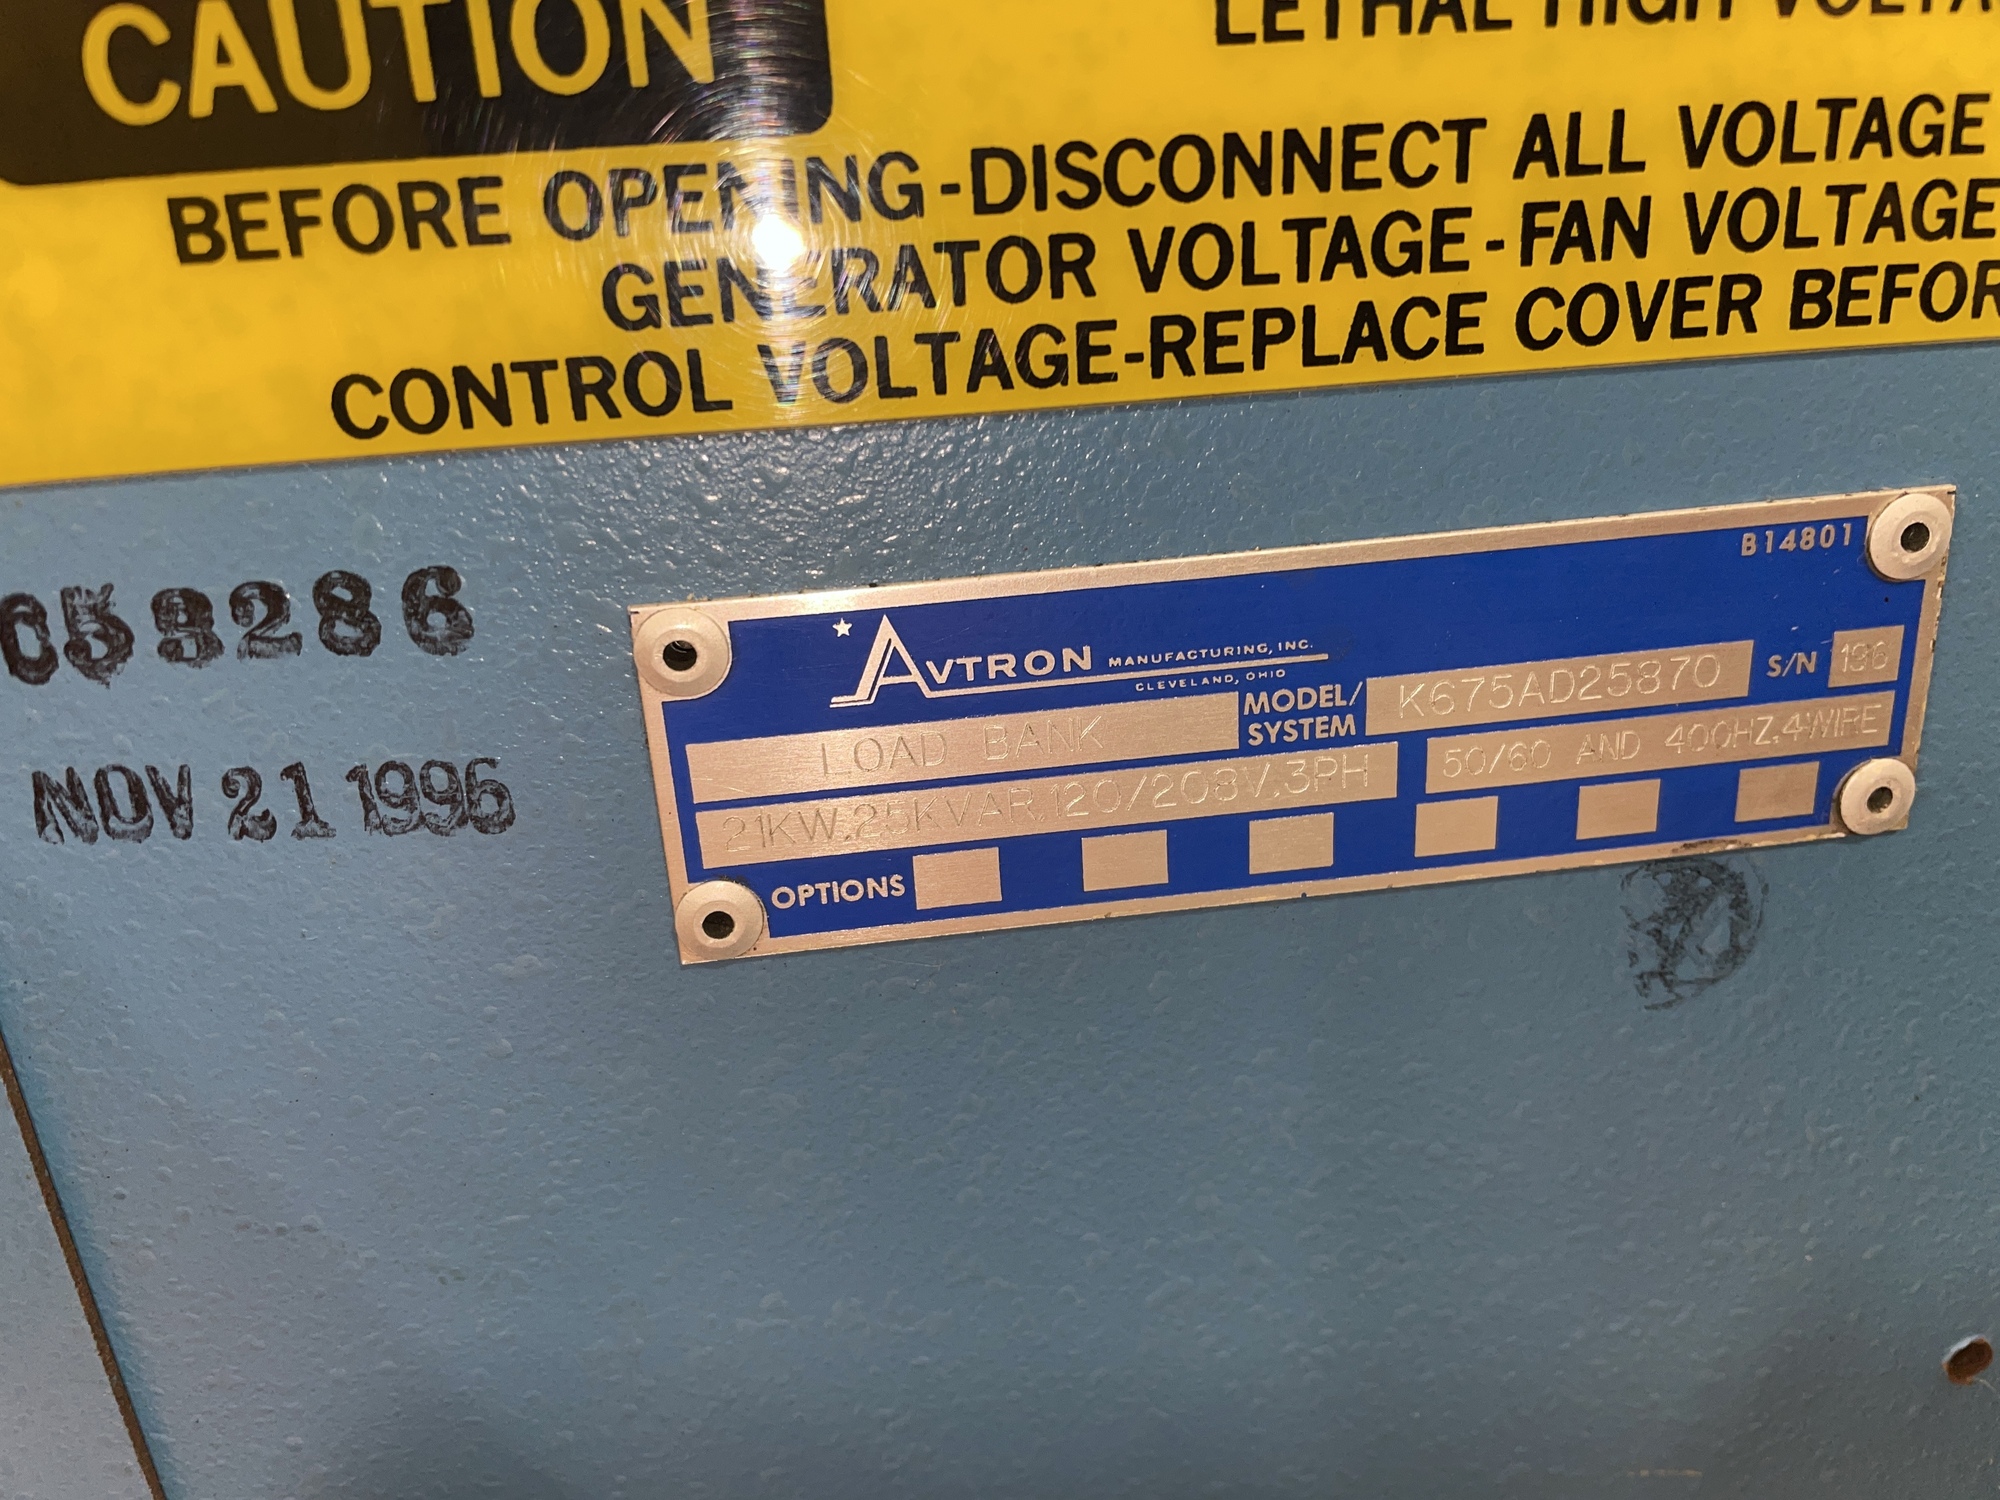 1996 AVTRON K675AD25870 Electrical Equipment, 3- Phase Transformers | New England Industrial Machinery